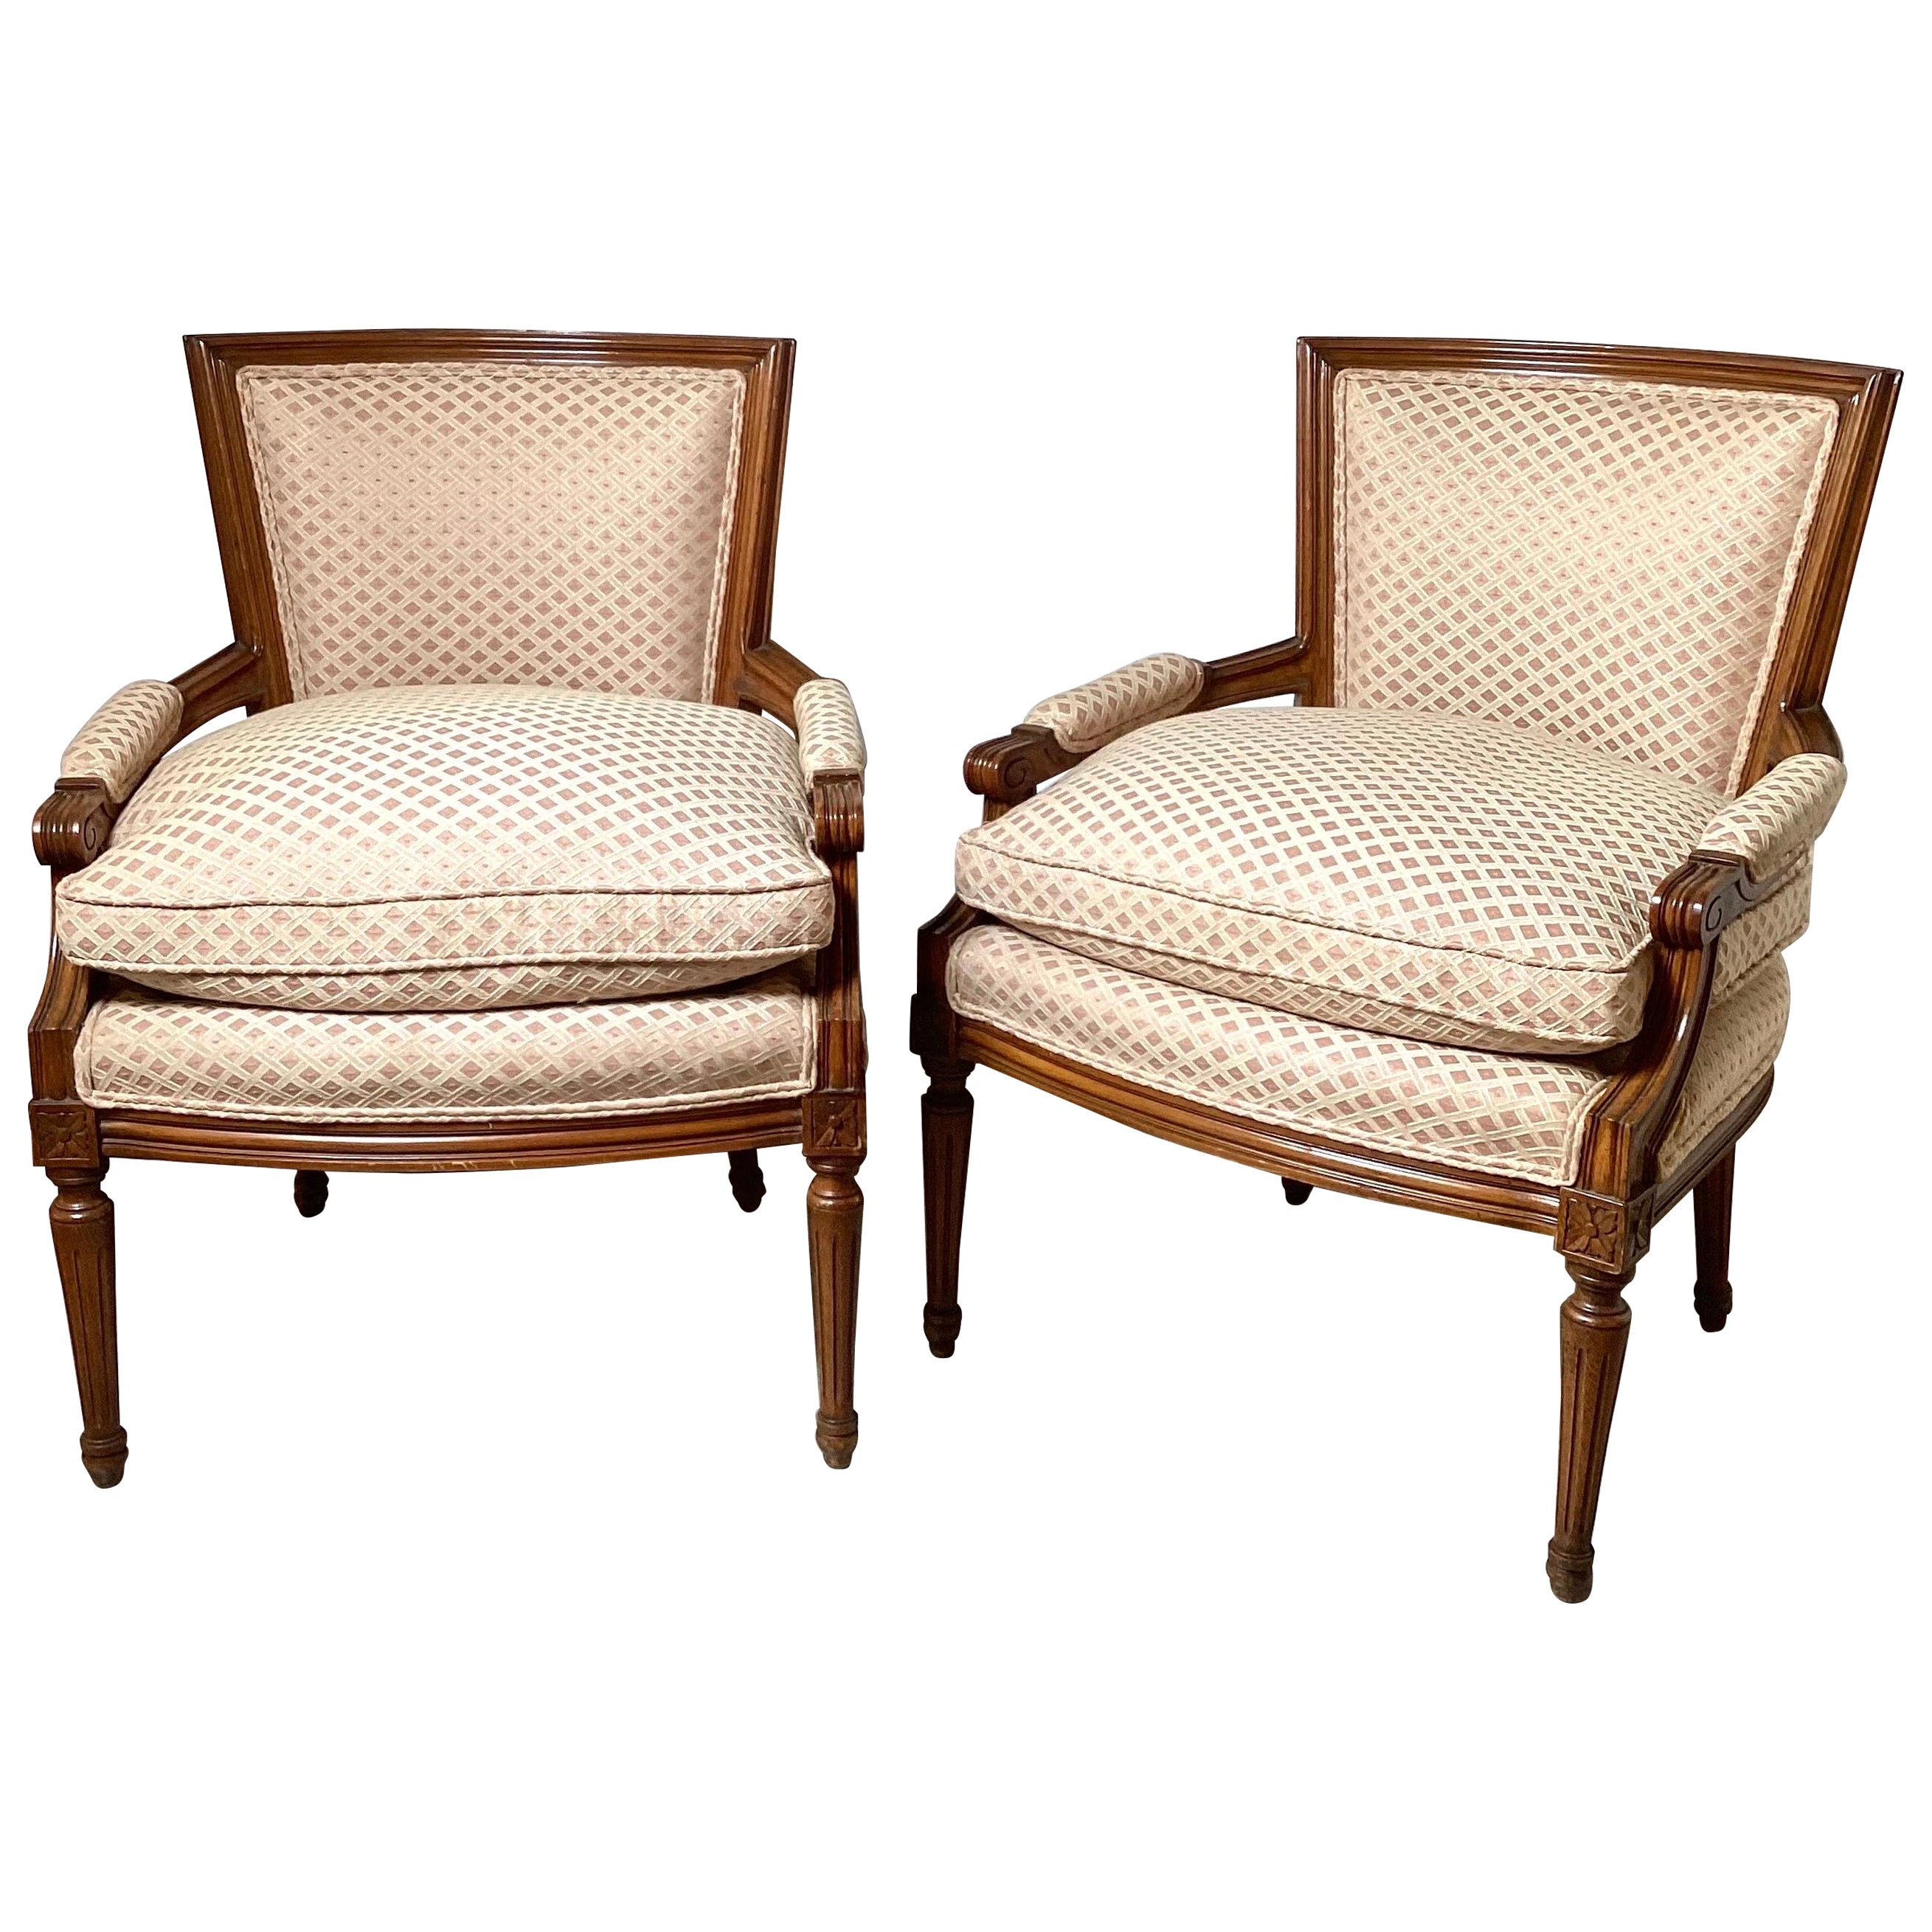 Pair of Walnut Louis XVI Style Continental Upholstered Chars 